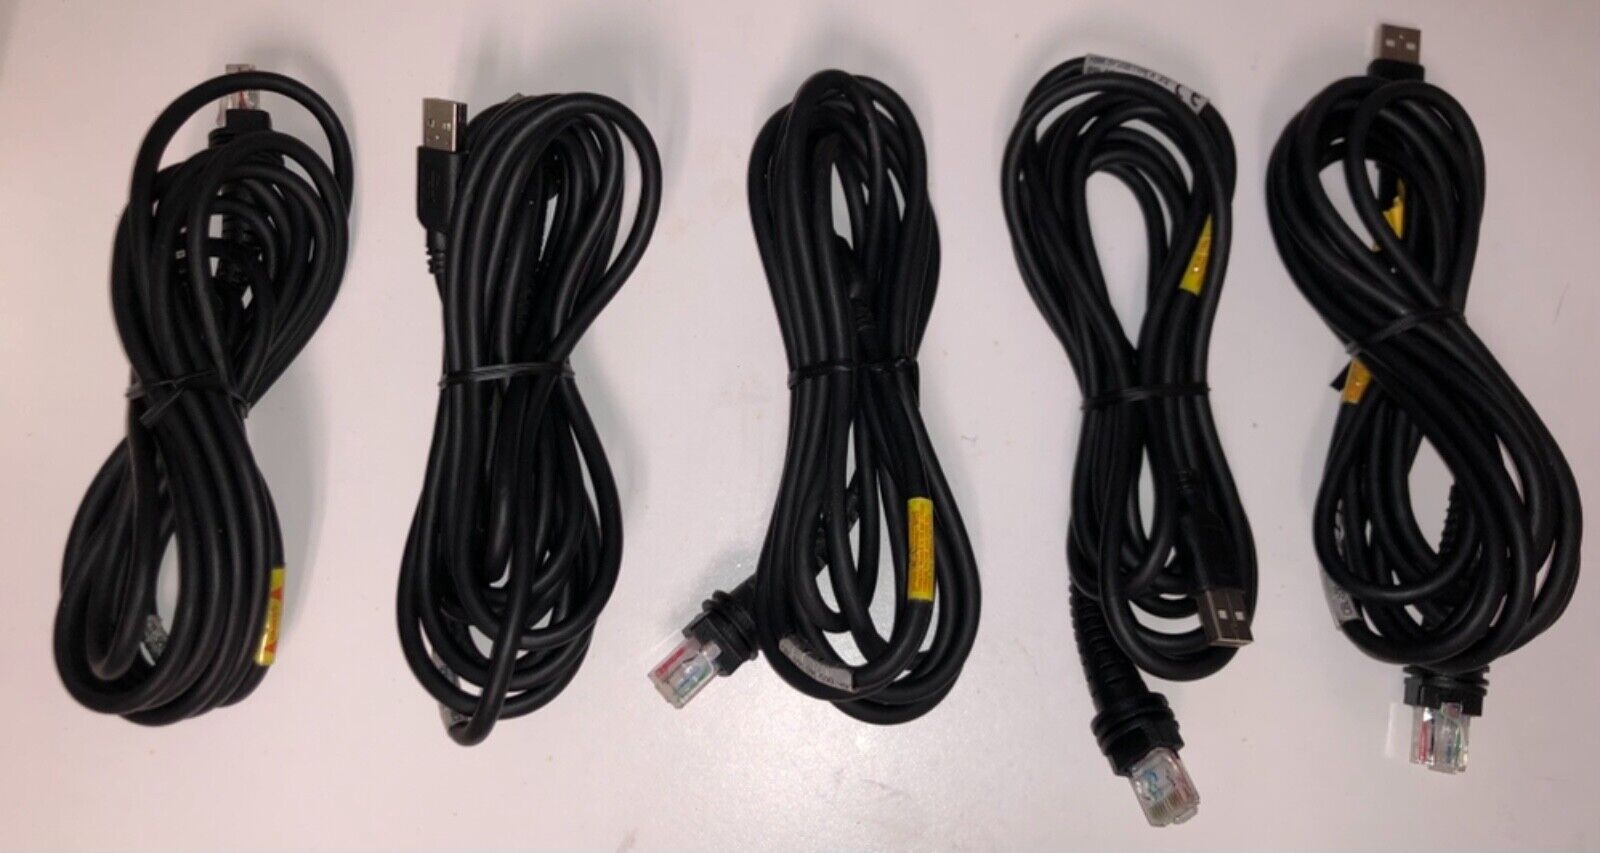 Lot of 5 Honeywell CBL-500-300-S00 Male USB Cable Type A 3M/9.8' 5v